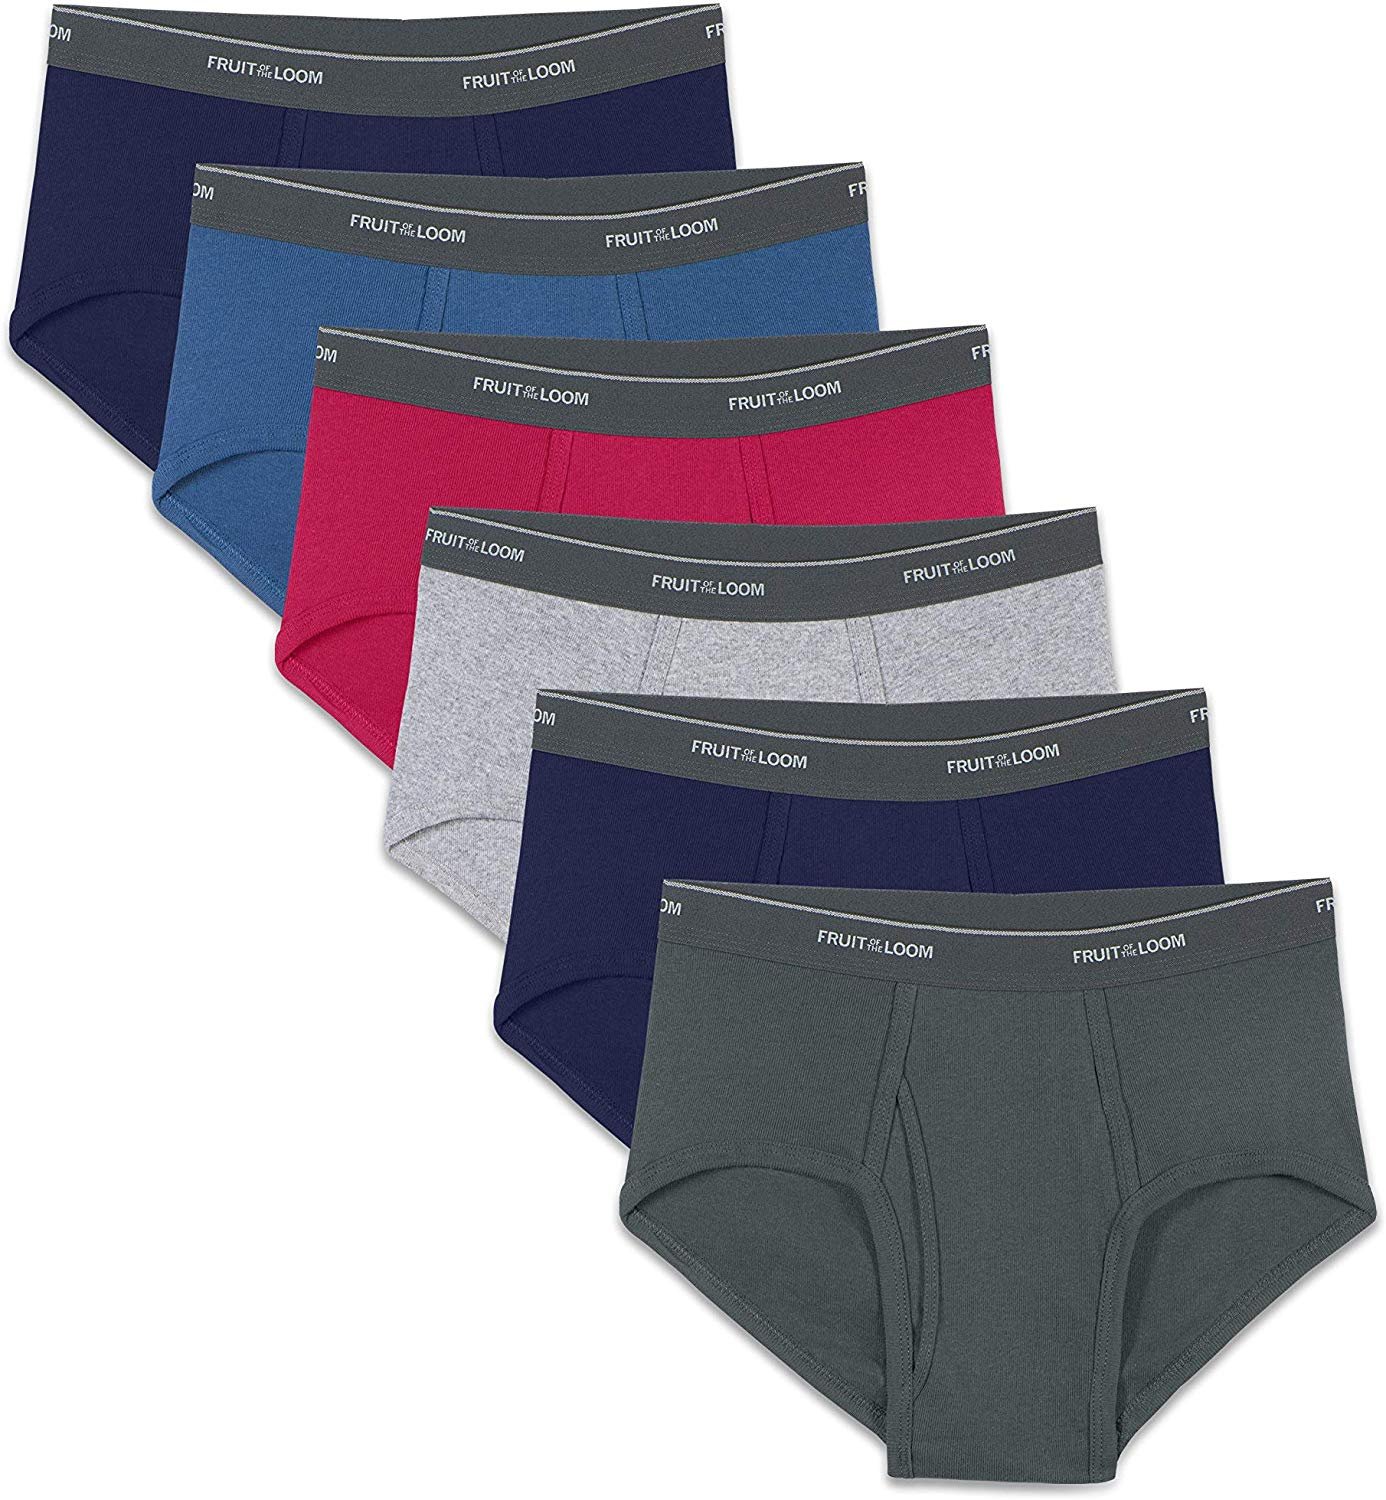 Fruit of the Loom Men'S Assorted Fashion Briefs, 6 Pack